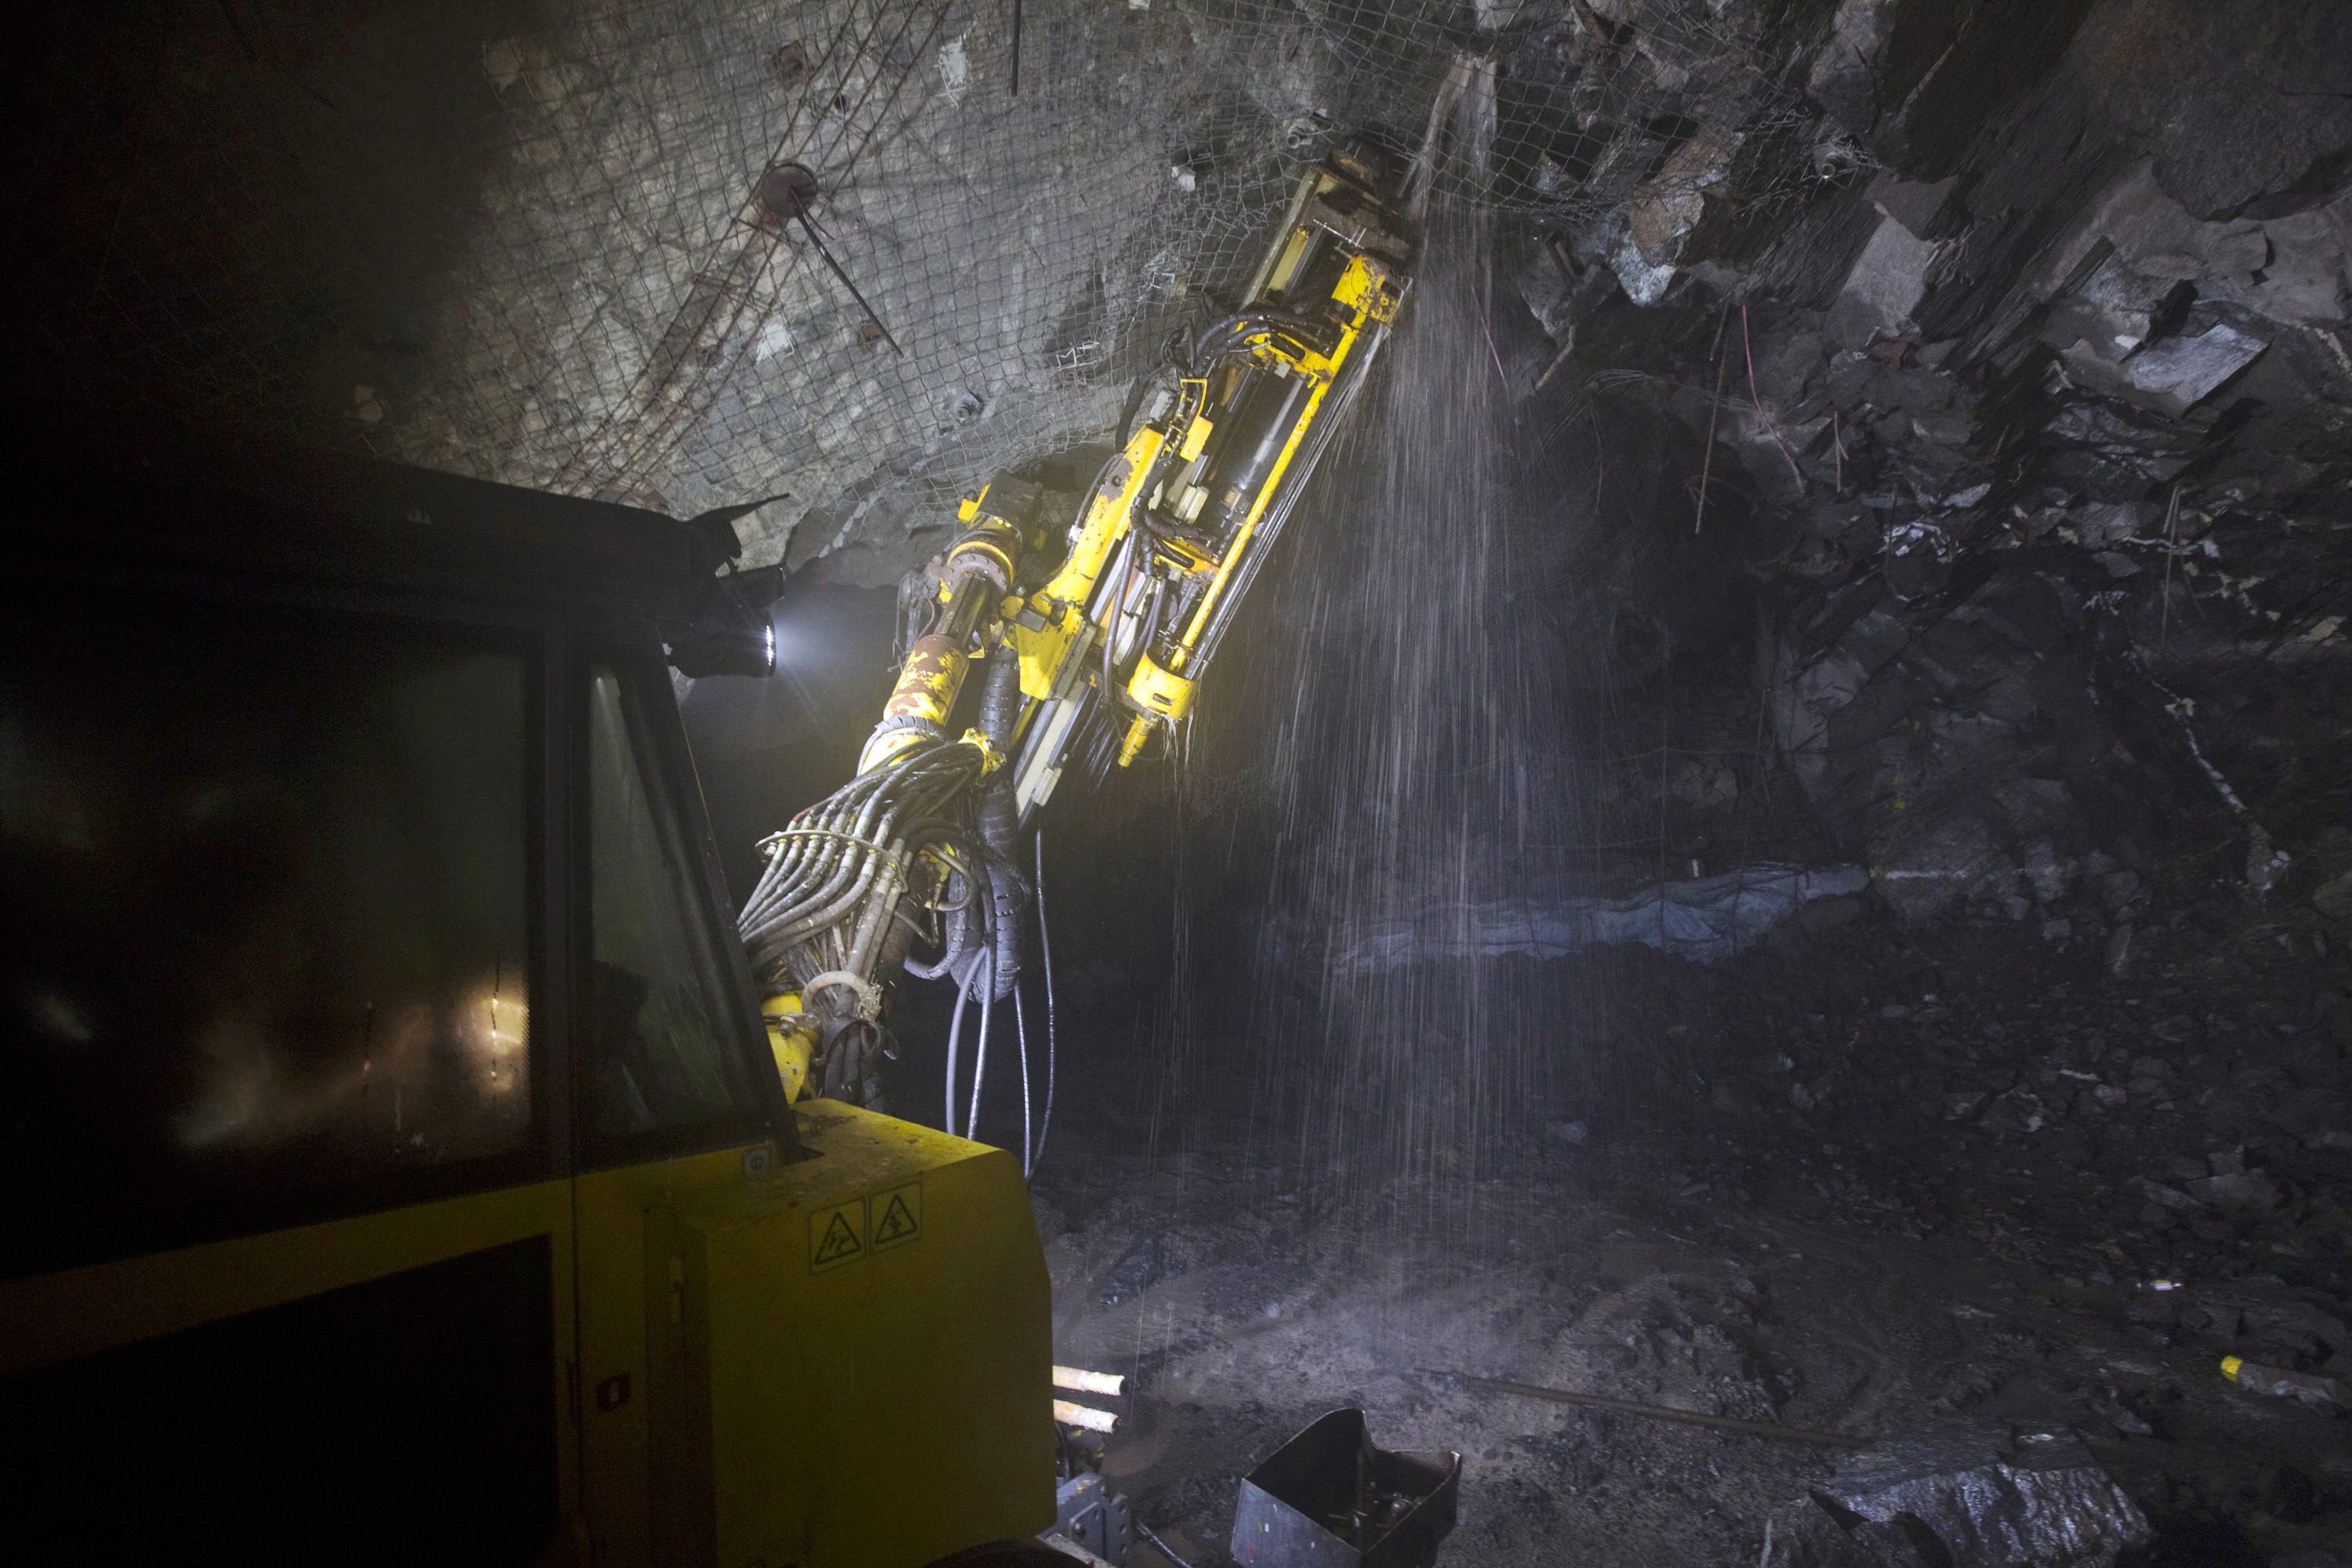 Drilling operations at a depth of 516 metres below the surface at the Chibuluma copper mine